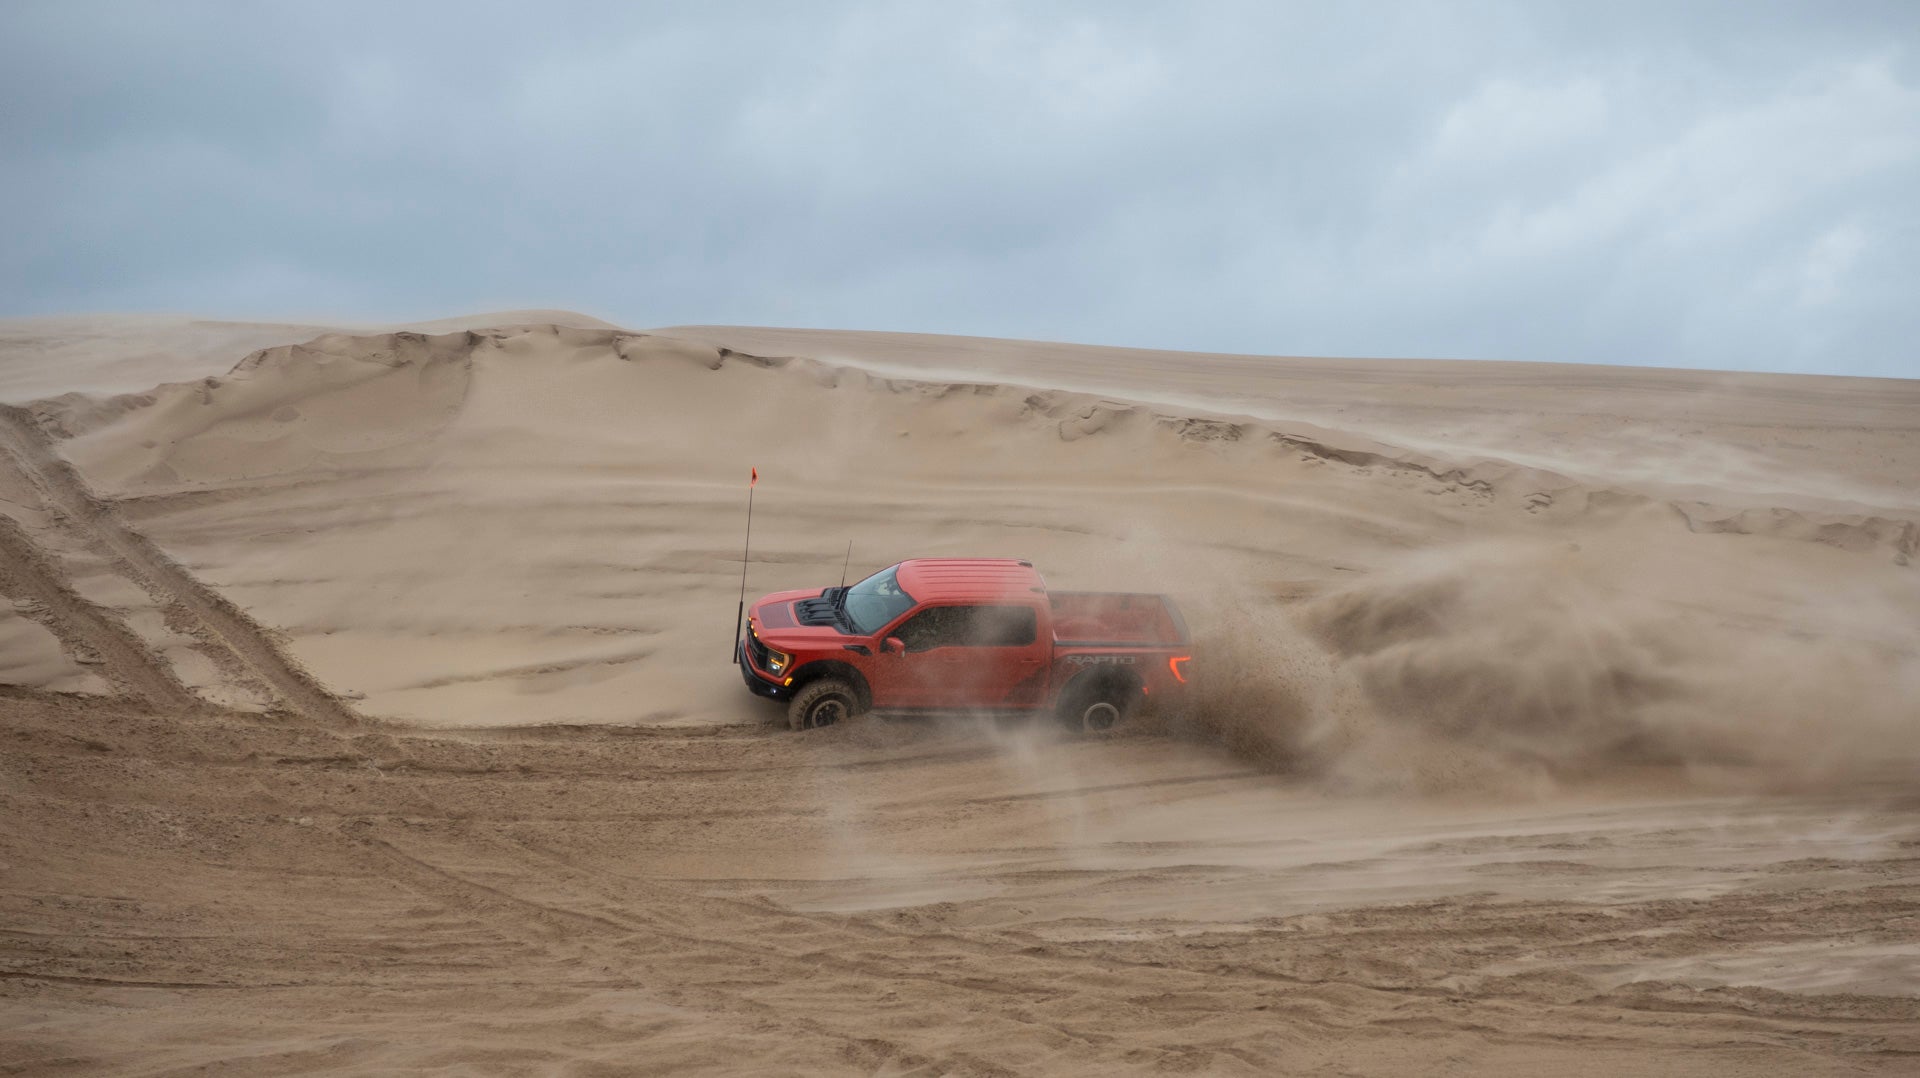 2023 Ford F-150 Raptor R doing a wall ride on a sand dune.